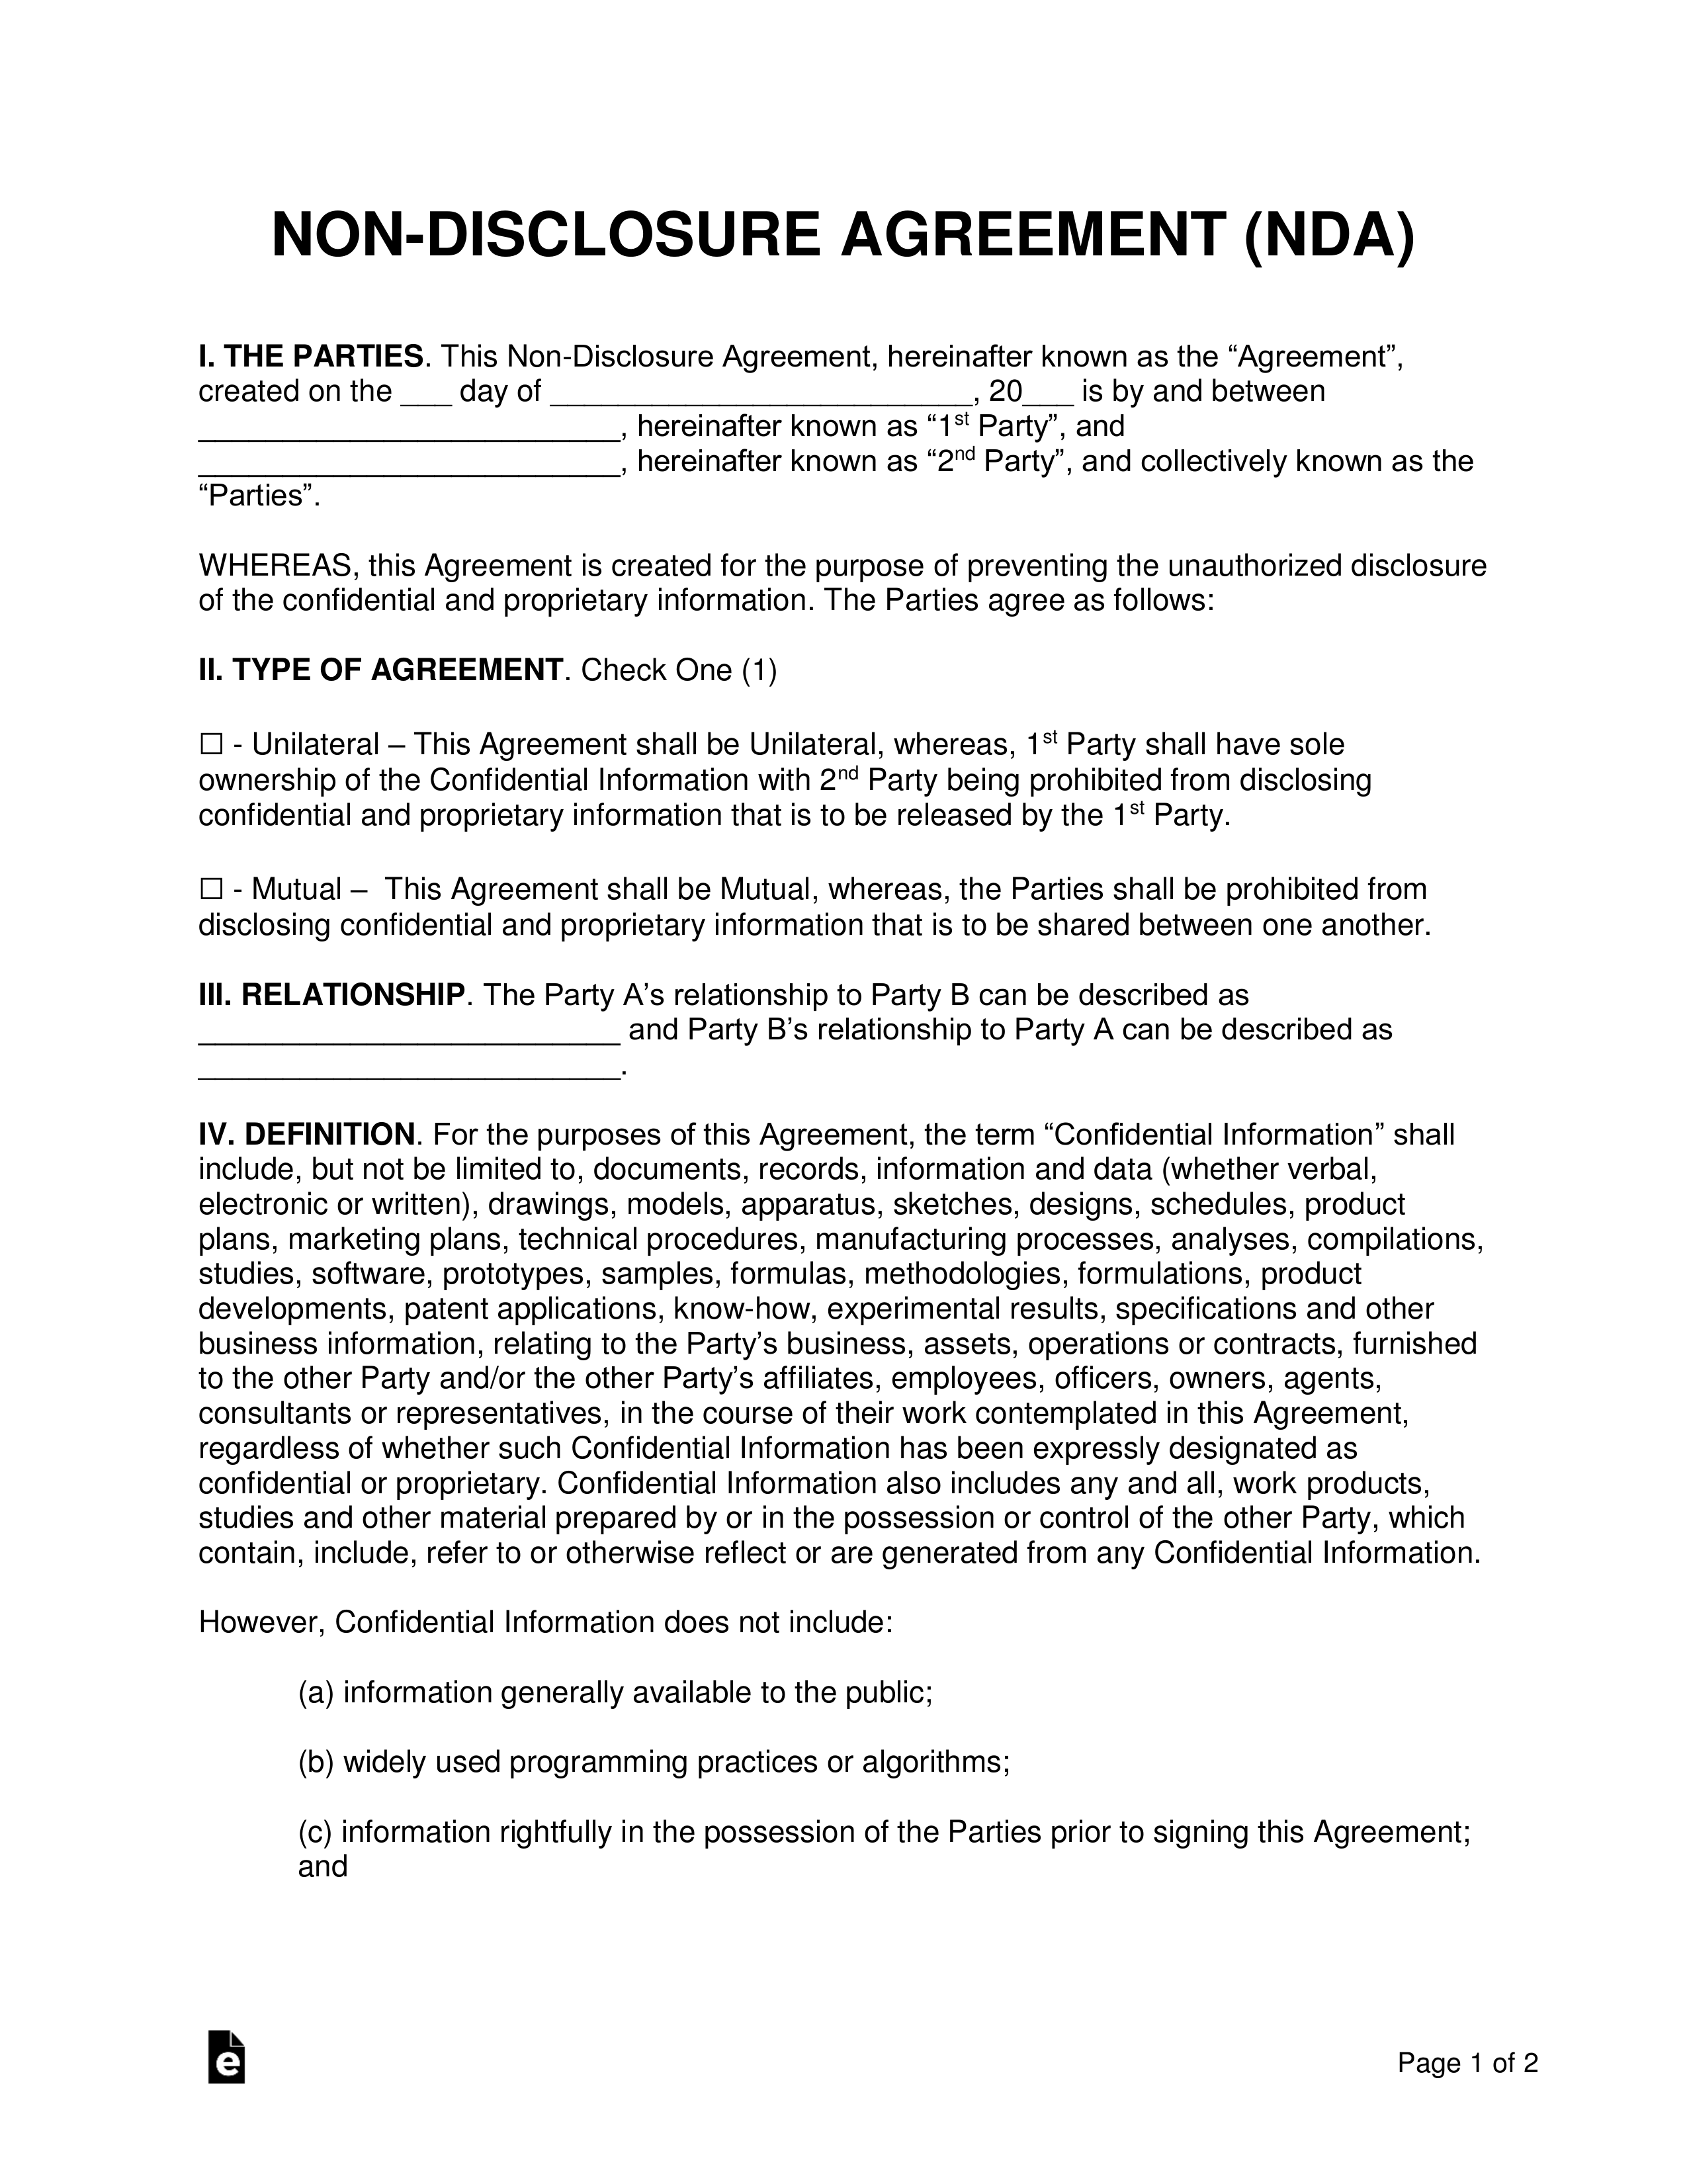 Elements Of A Non Disclosure Agreement